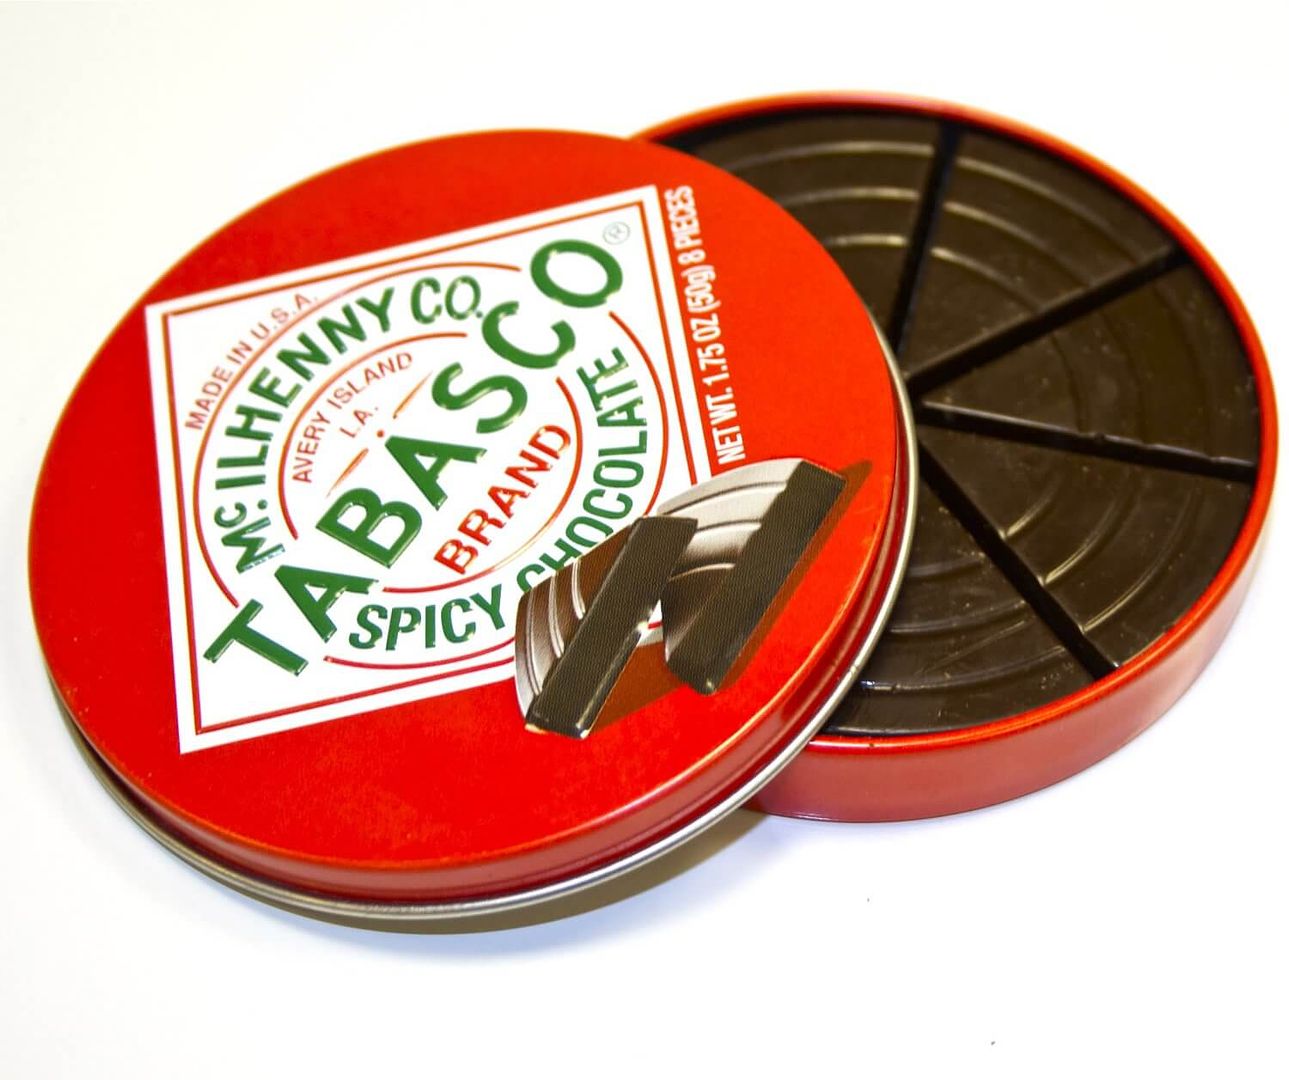 Cool Mom Eats holiday gift guide 2016: Food-themed stocking stuffers | Tabasco Spicy Chocolate 